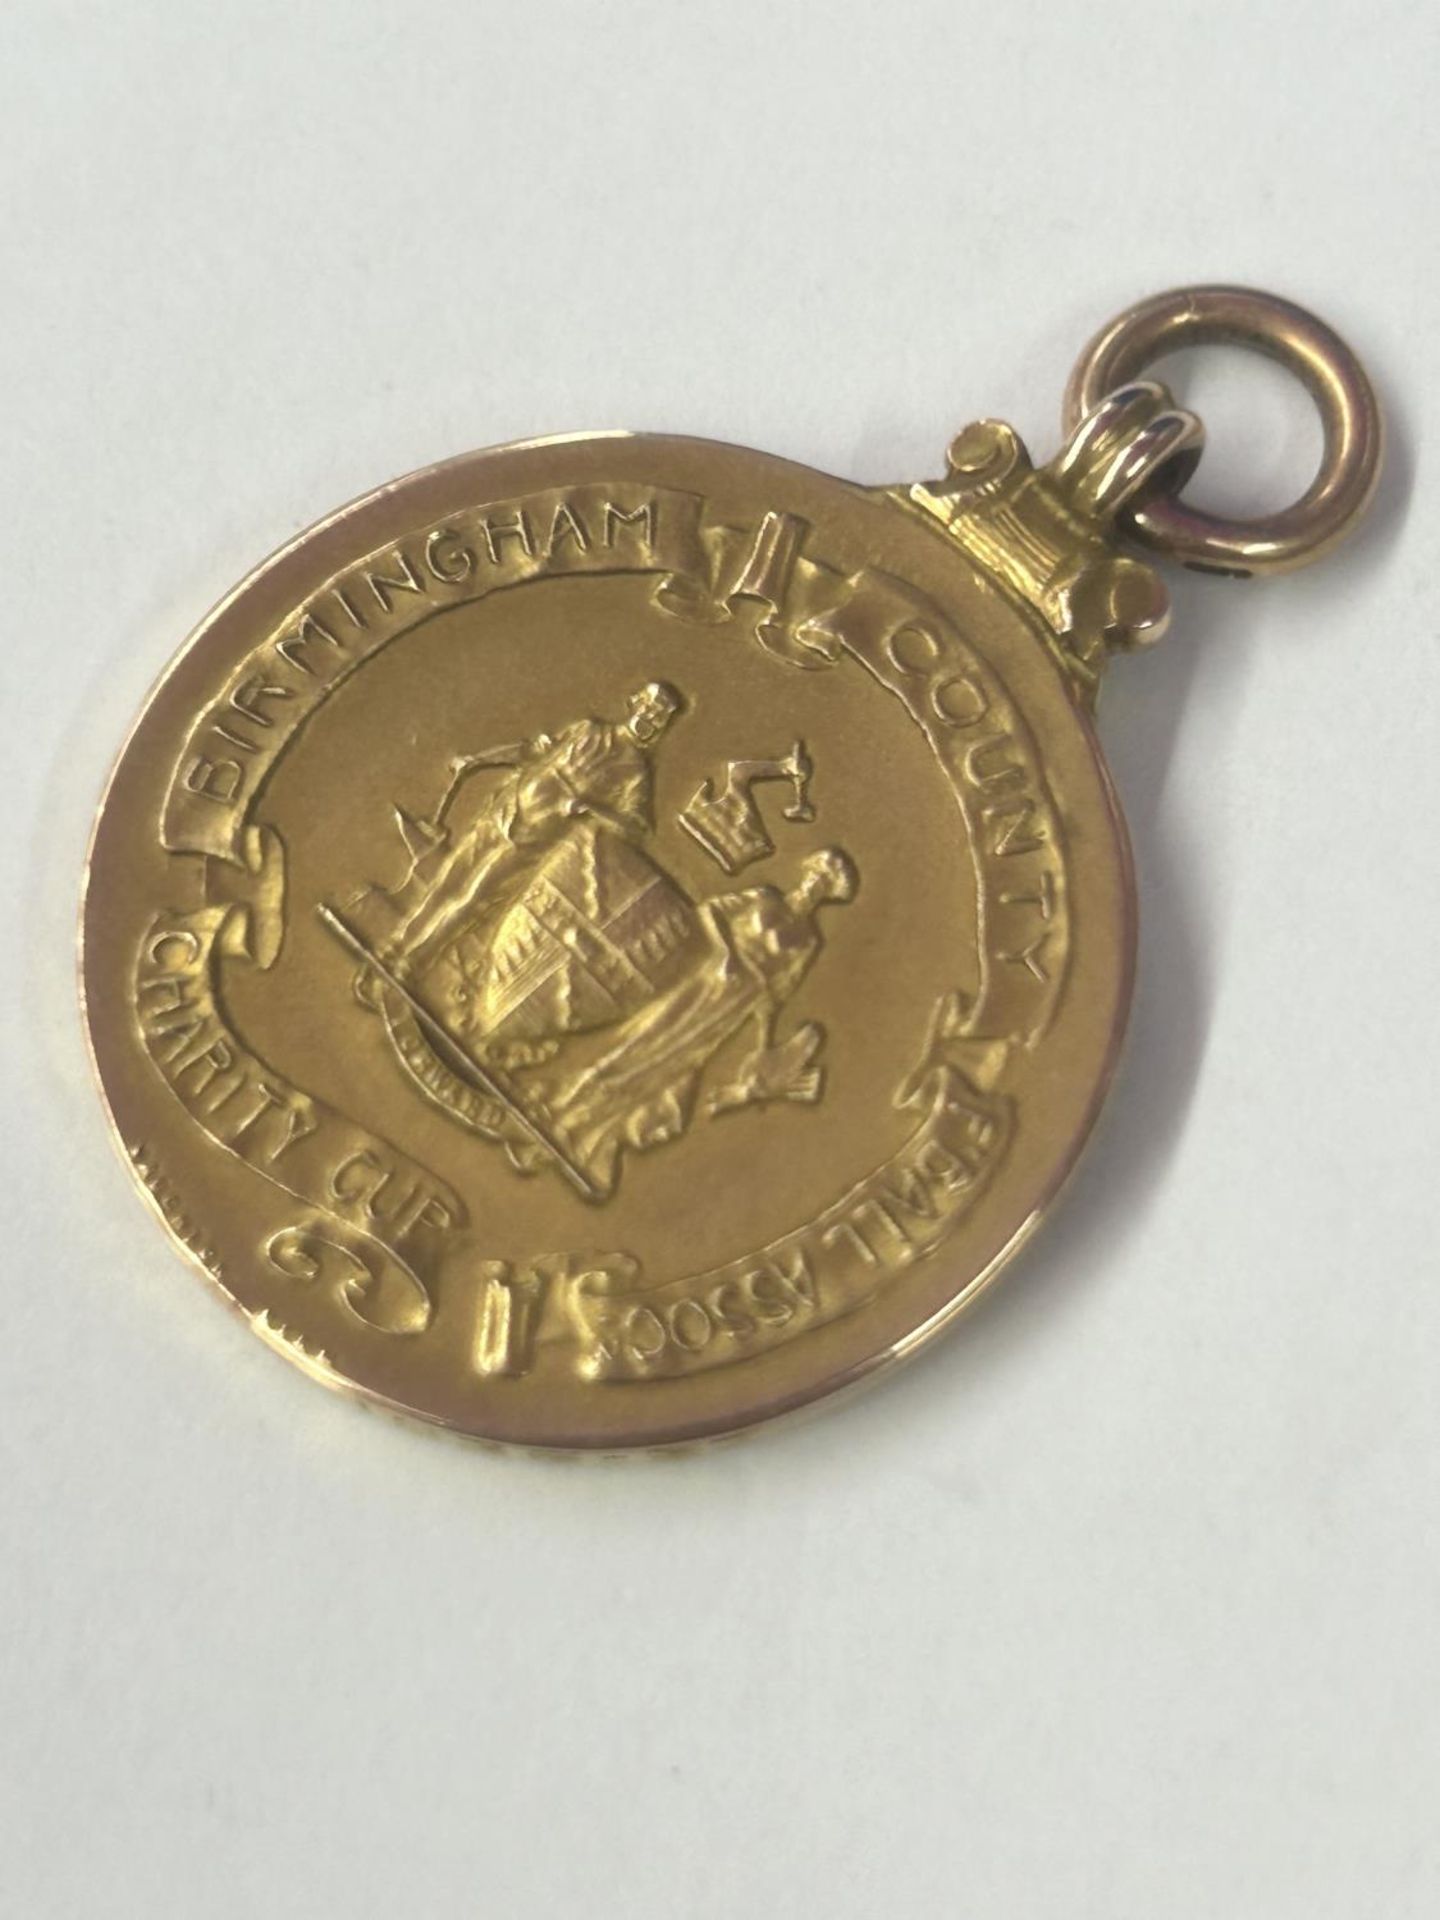 A HALLMARKED 9 CARAT GOLD BIRMINGHAM COUNTY FOOTBALL ASSOCIATION CHARITY CUP JOINT WINNERS MEDAL - Image 4 of 6